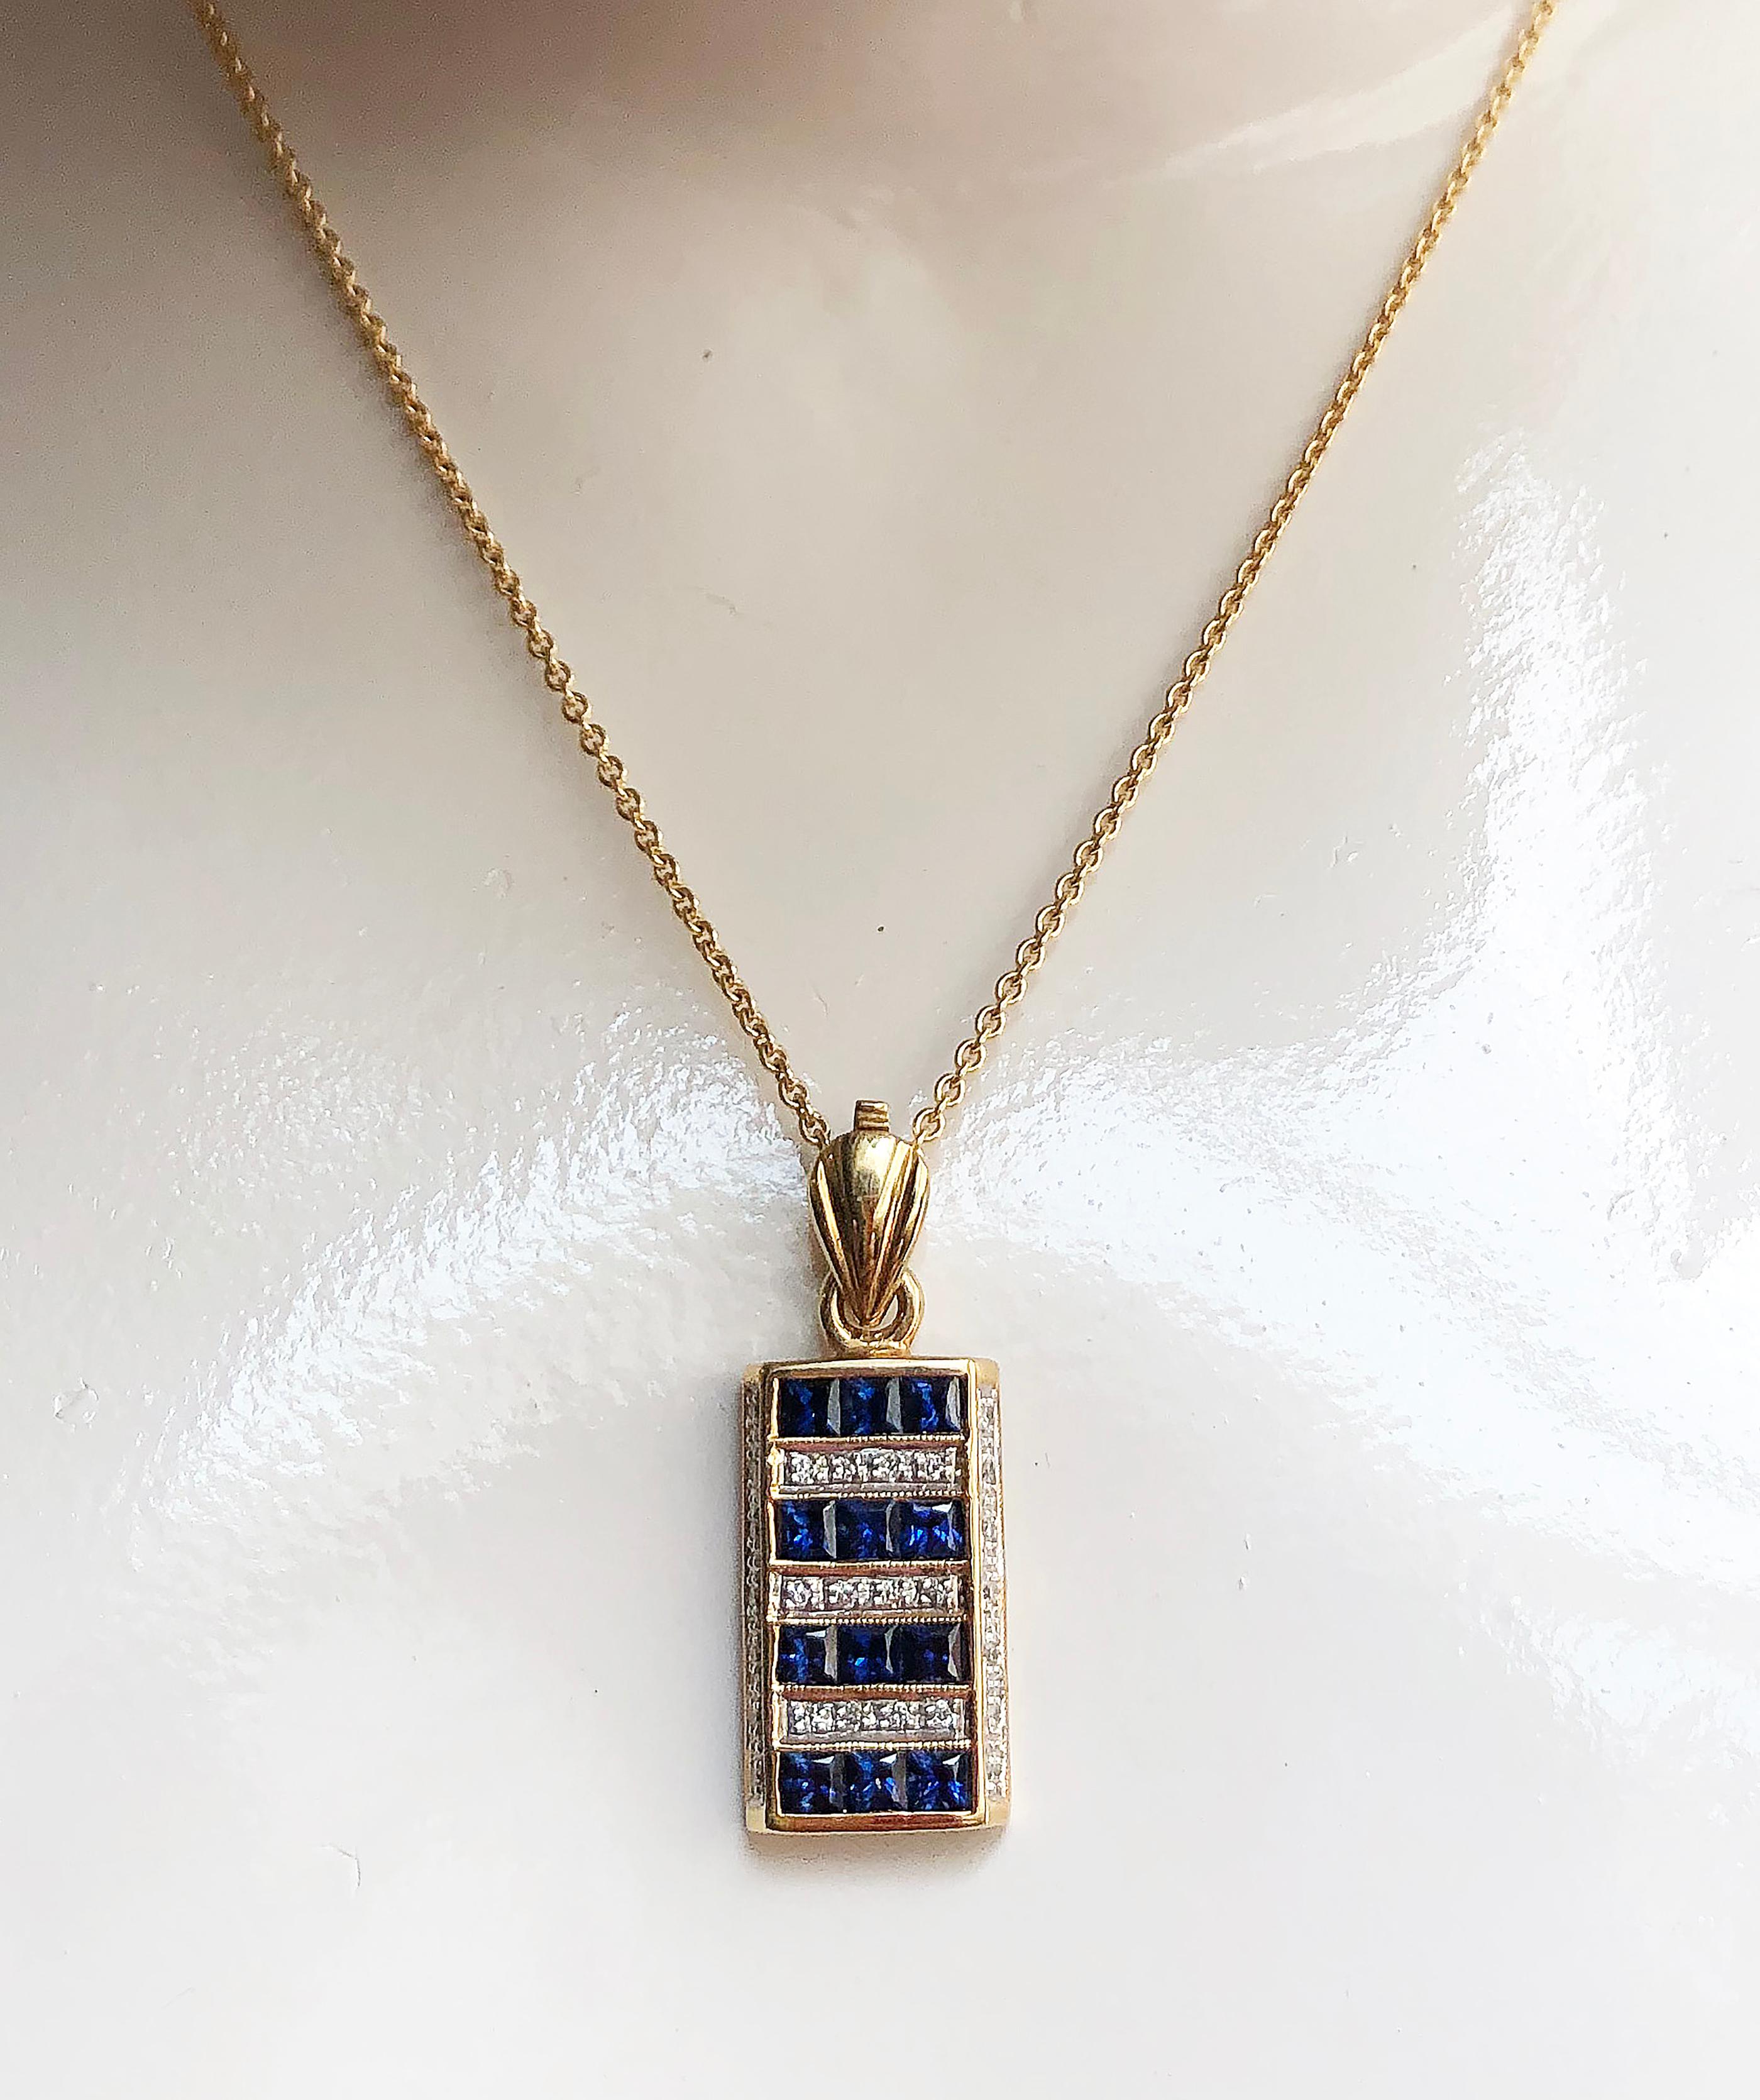 Blue Sapphire 1.54 carats with Diamond 0.18 carat Pendant set in 18 Karat Gold Settings
(chain not included)

Width: 1.2 cm
Length: 3.0 cm 

